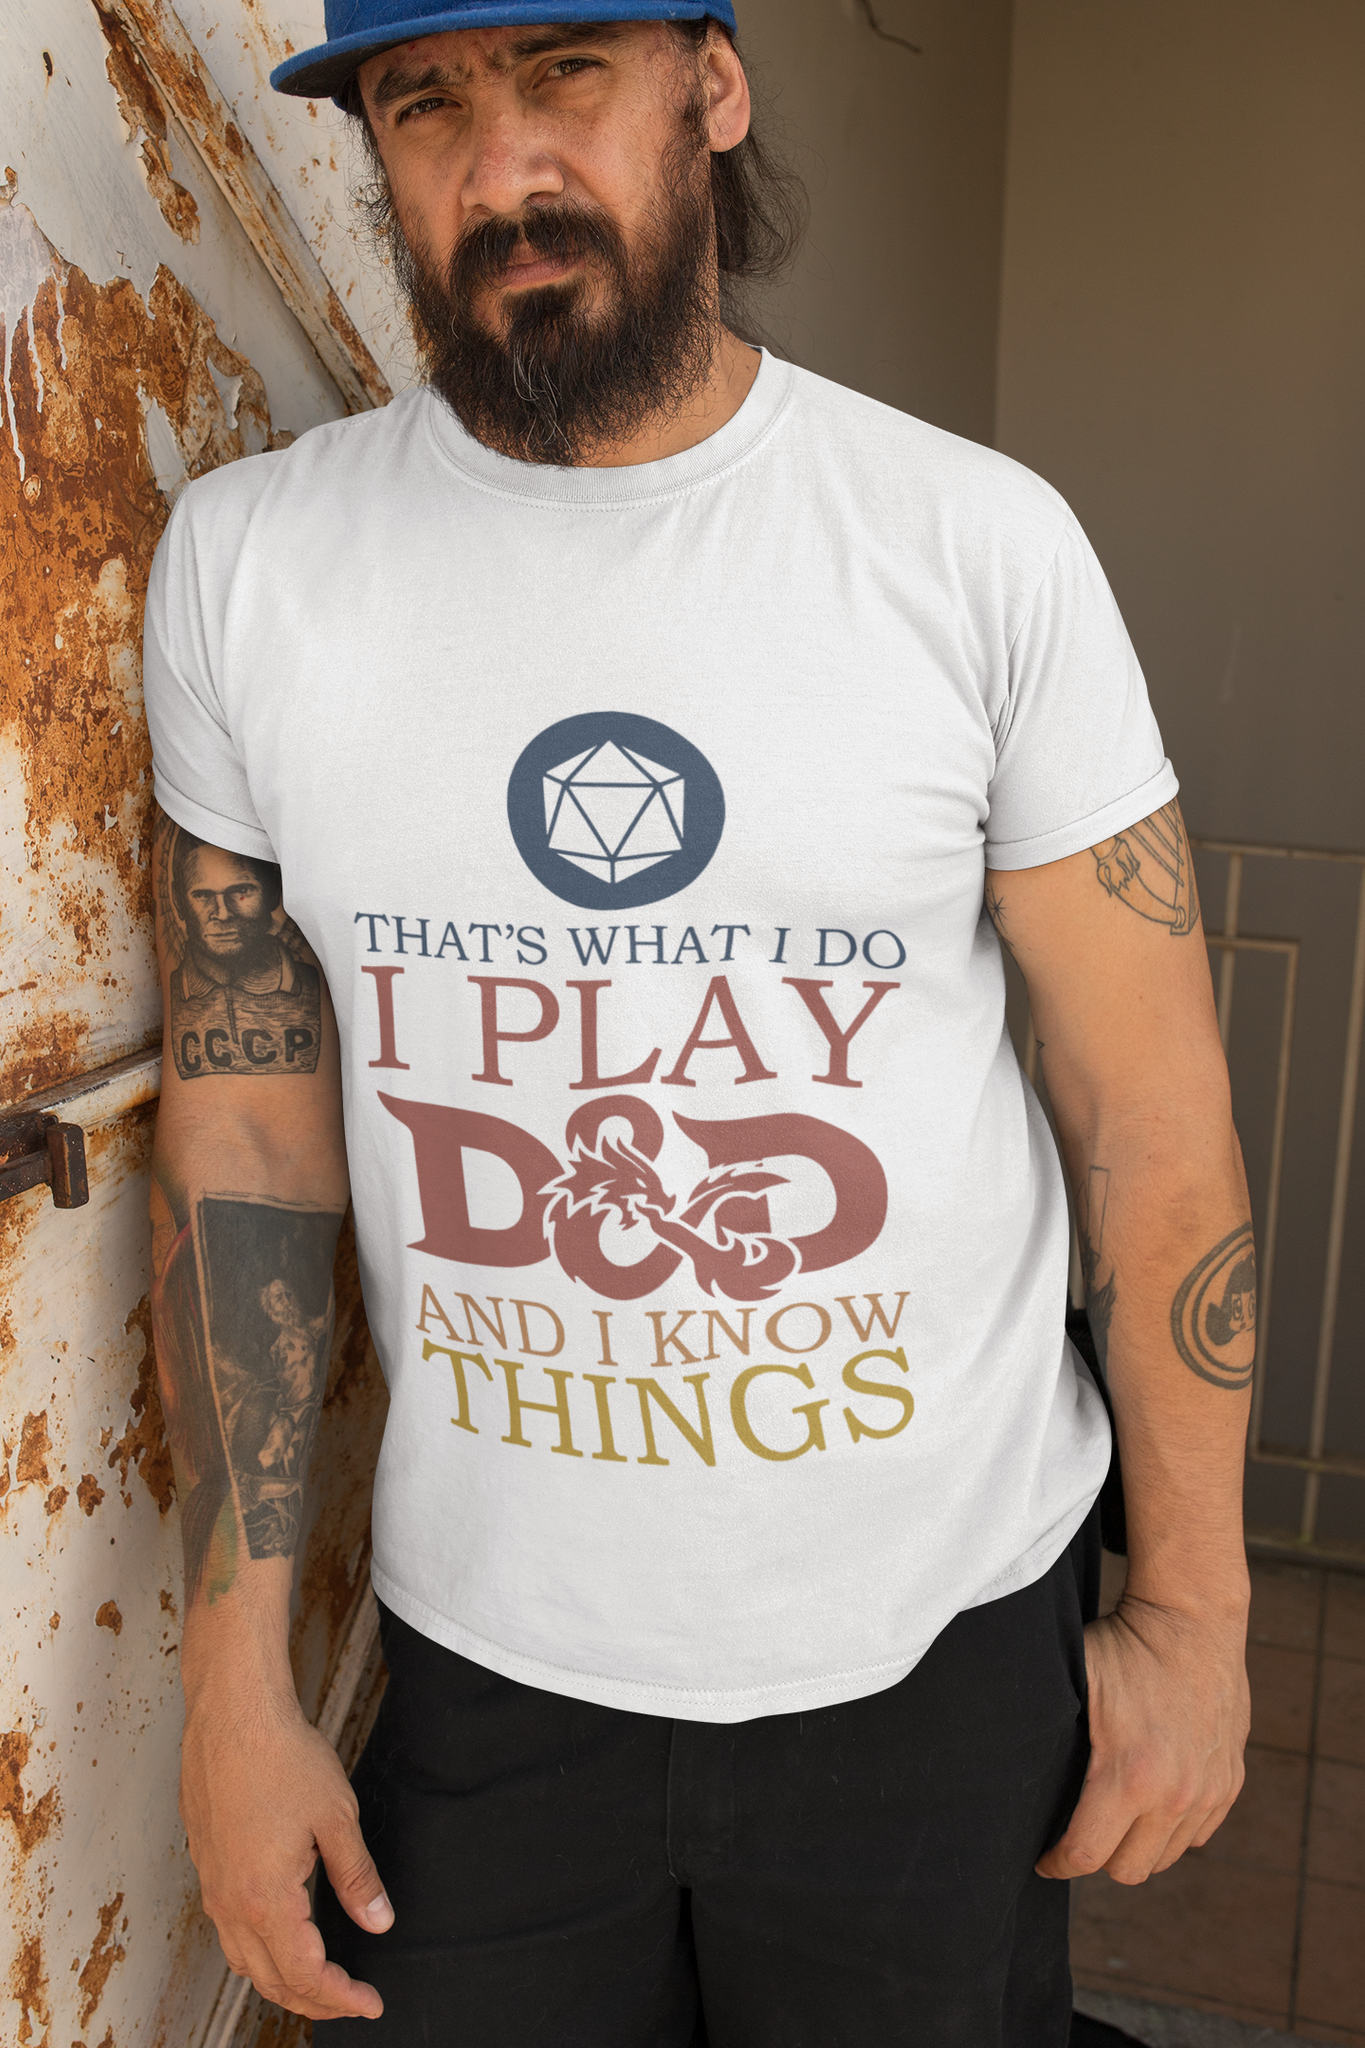 Dungeon And Dragon T Shirt, RPG Dice Games Tshirt, Thats What I Do I Play DND And I Know Things T Shirt